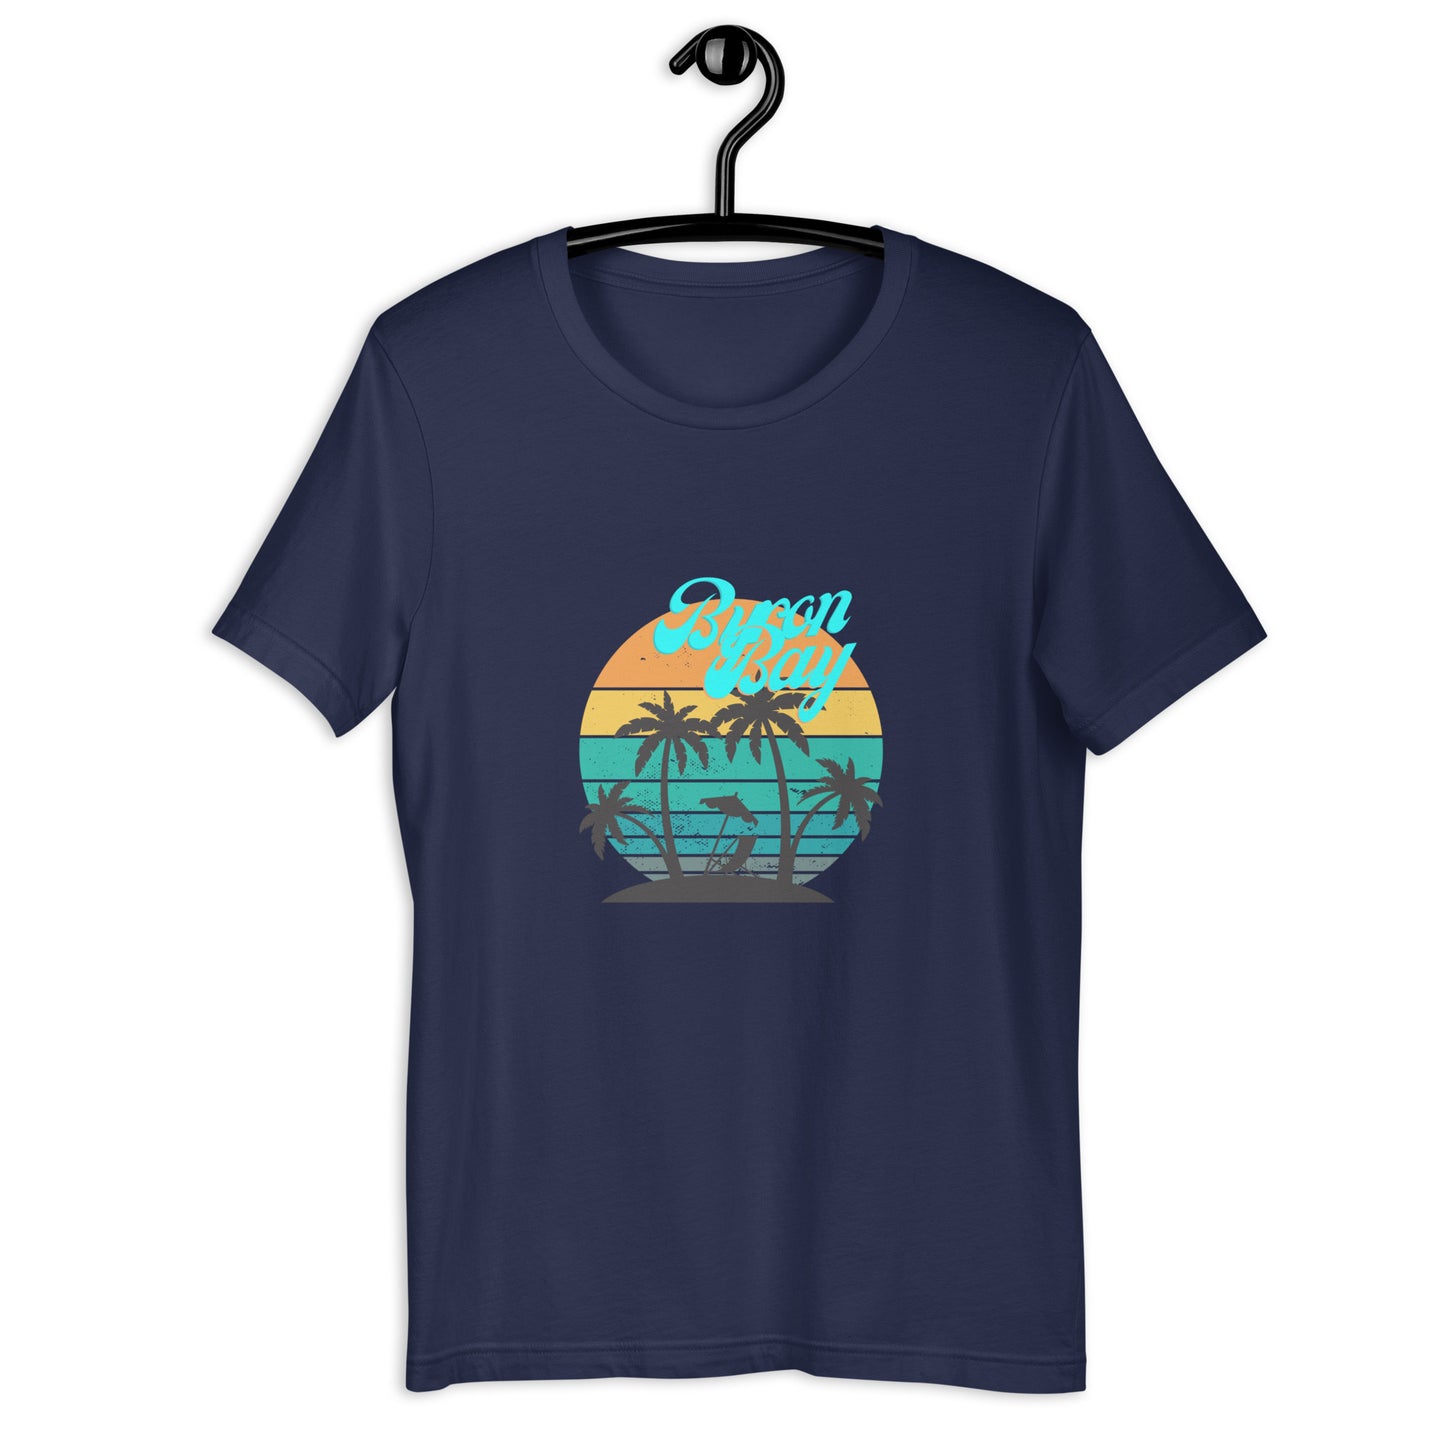  Unisex T-Shirt - Navy - Front flat lay view - Byron Bay design on front - Genuine Byron Bay Merchandise | Produced by Go Sea Kayak Byron Bay 